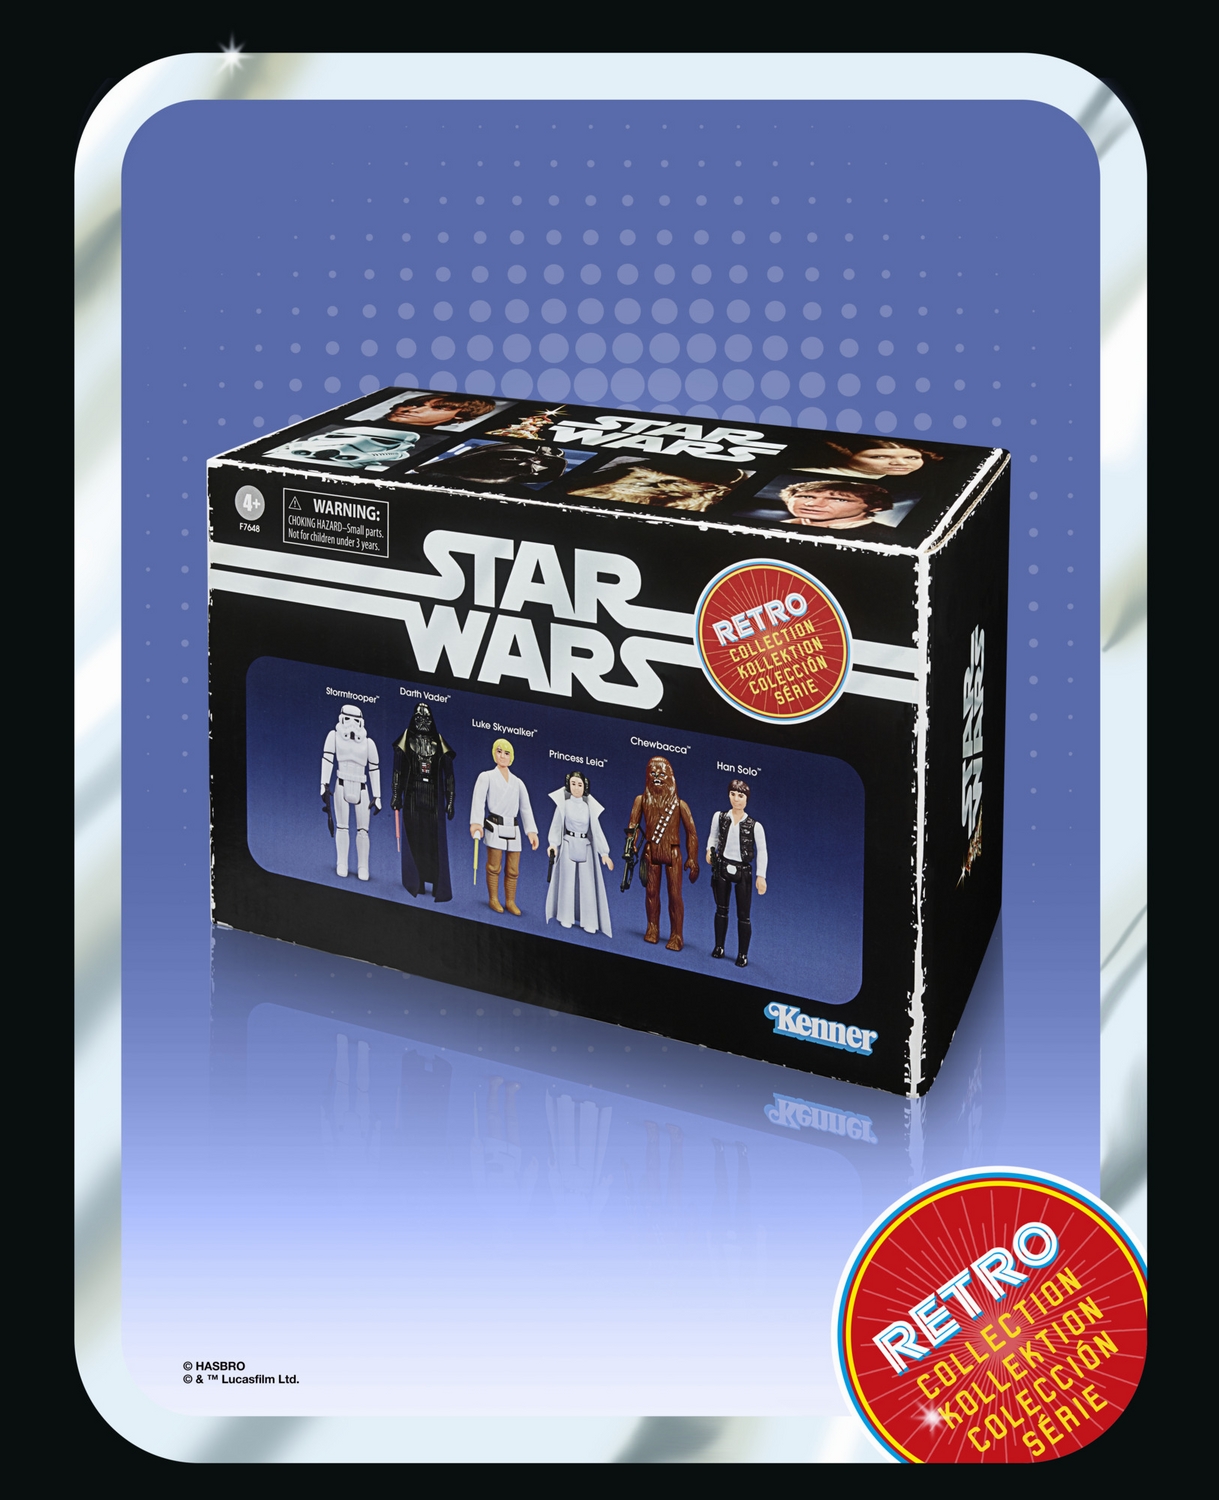 STAR WARS RETRO COLLECTION STAR WARS A NEW HOPE COLLECTIBLE MULTIPACK - 15.jpg